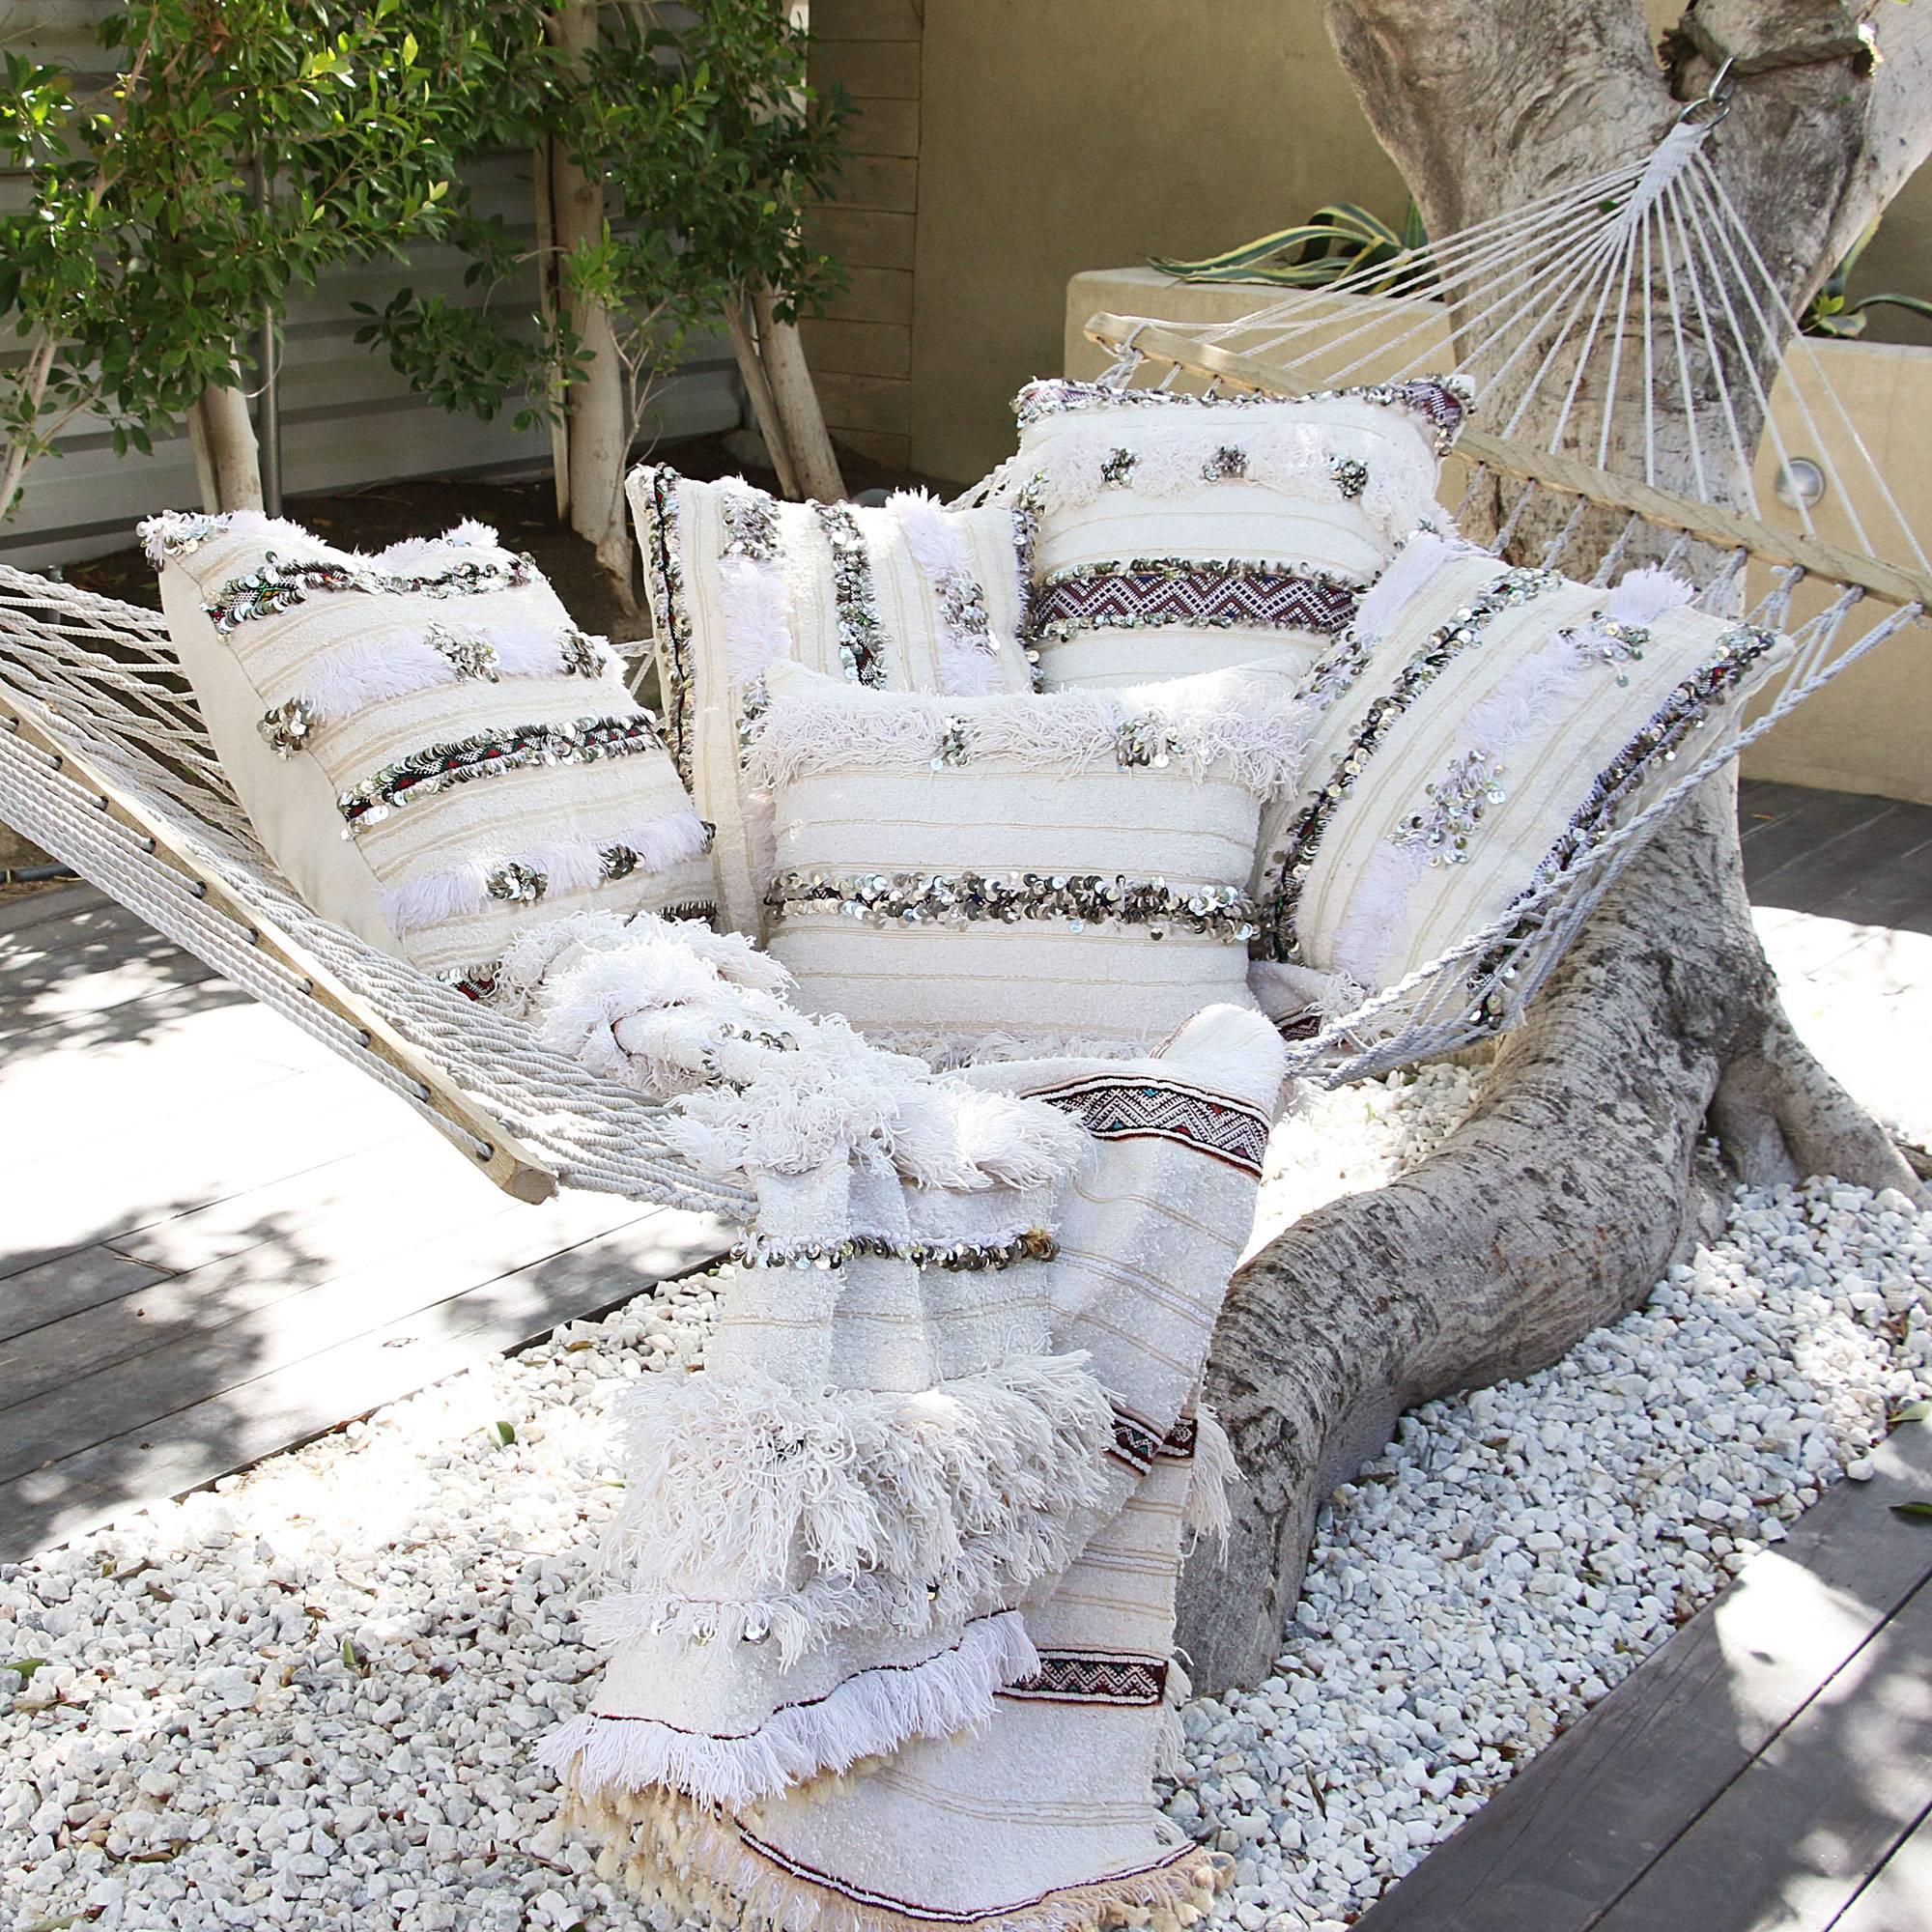 White Handira Pillow In Excellent Condition For Sale In Palm Springs, CA